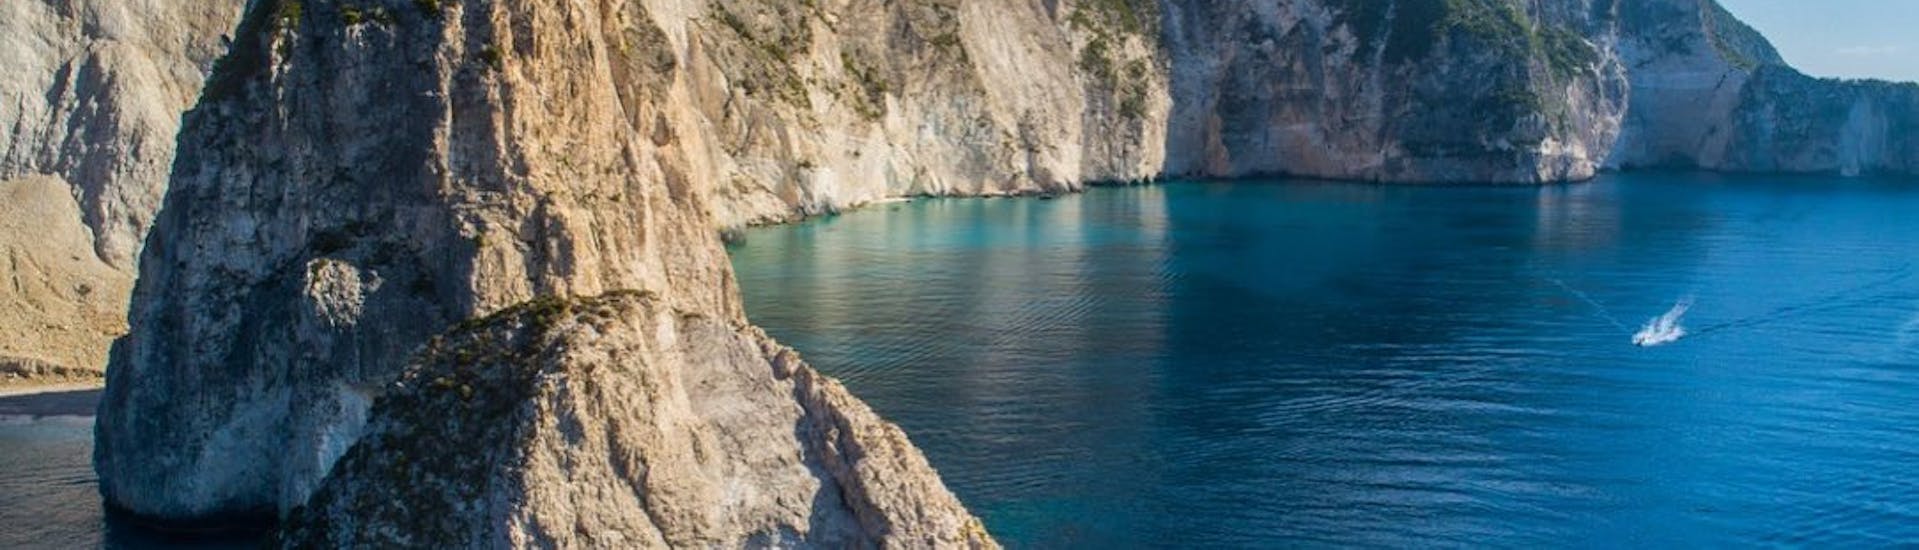 Picture of the Mizithres Rocks, which can be visited during the boat trip to Mizithres Rocks & Turtle Island with Traventure Zakynthos.